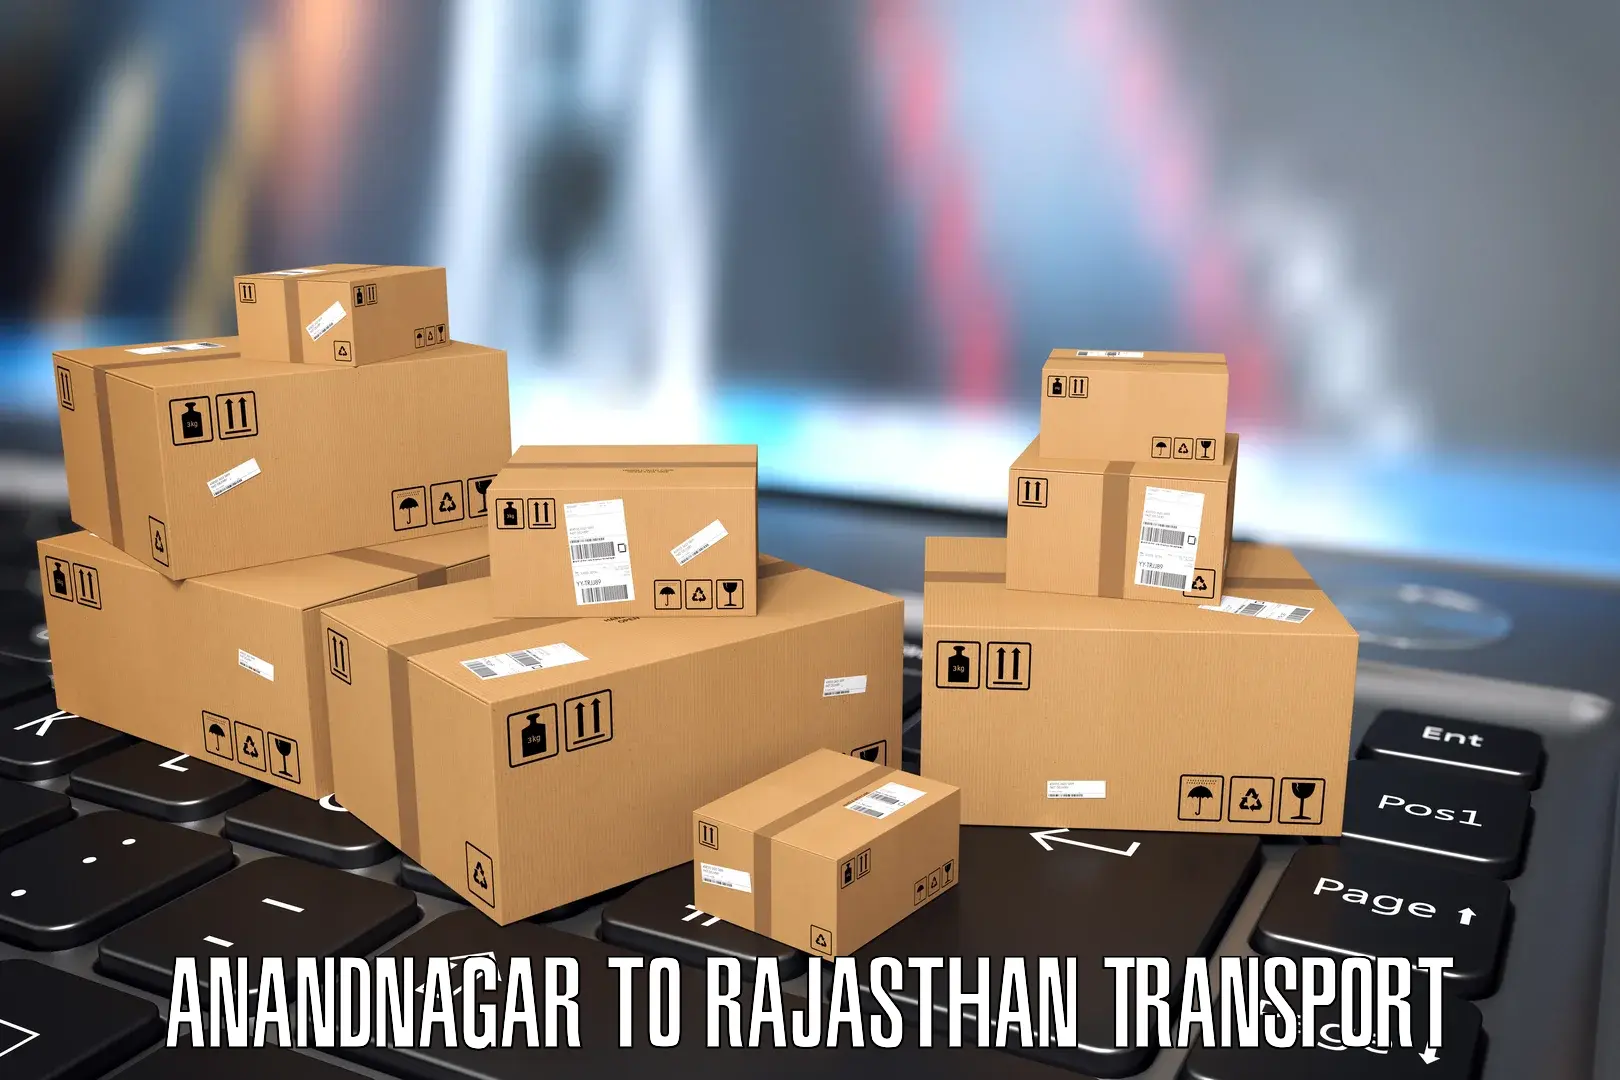 Truck transport companies in India Anandnagar to Chomu